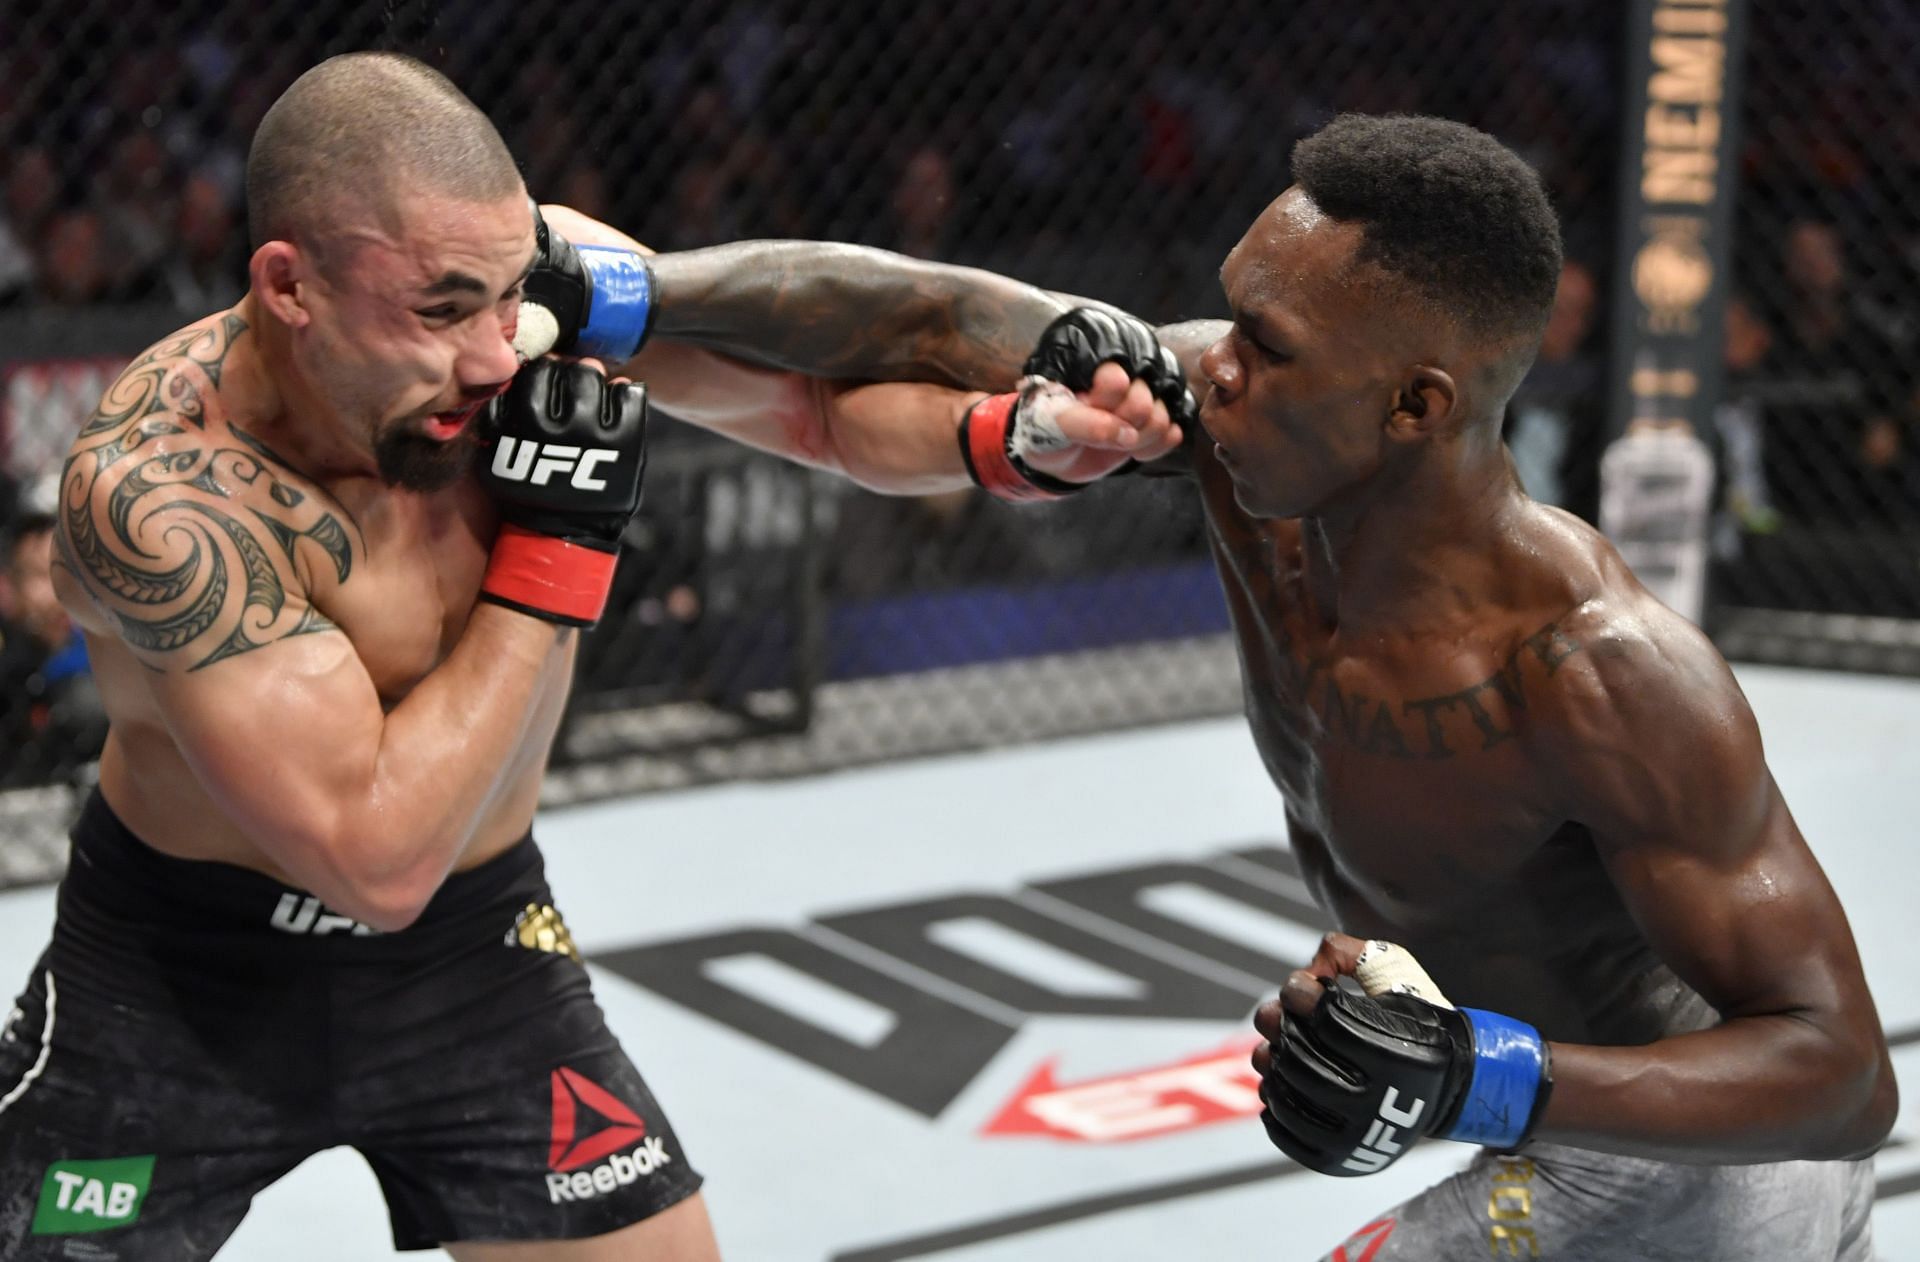 Israel Adesanya dismantled Robert Whittaker to claim middleweight gold in 2019